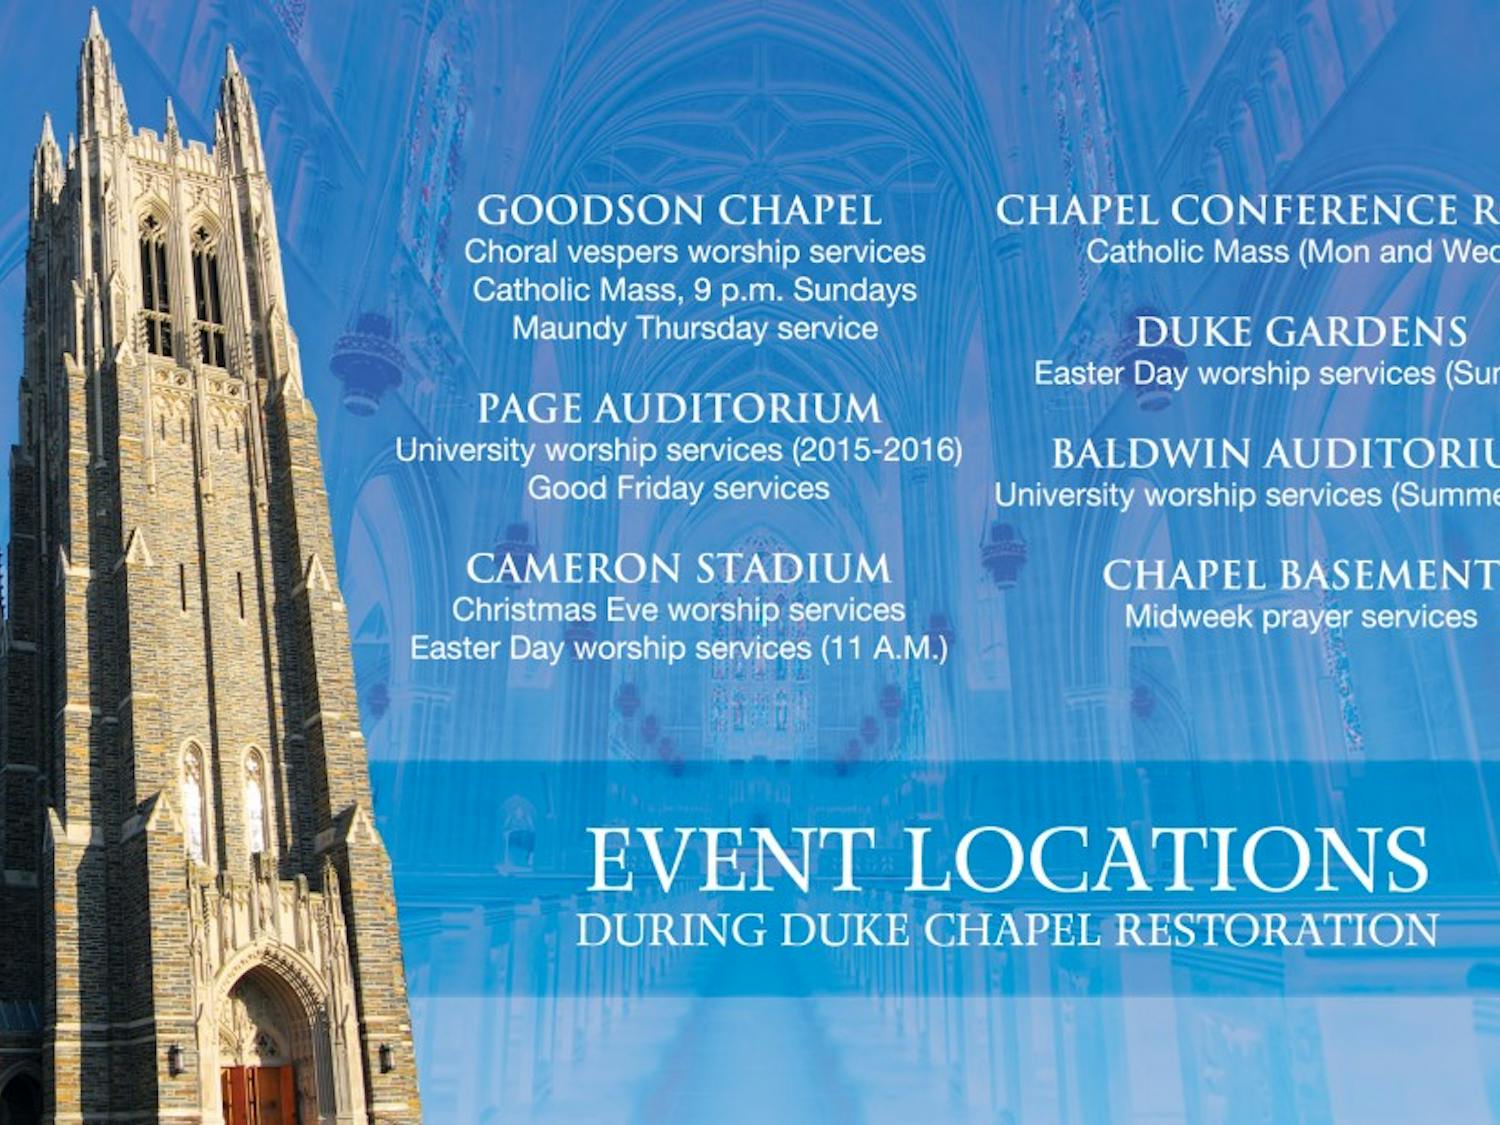 Duke has announced the relocation of many events that normally take place in the Duke Chapel while it undergoes renovation until Spring 2016.